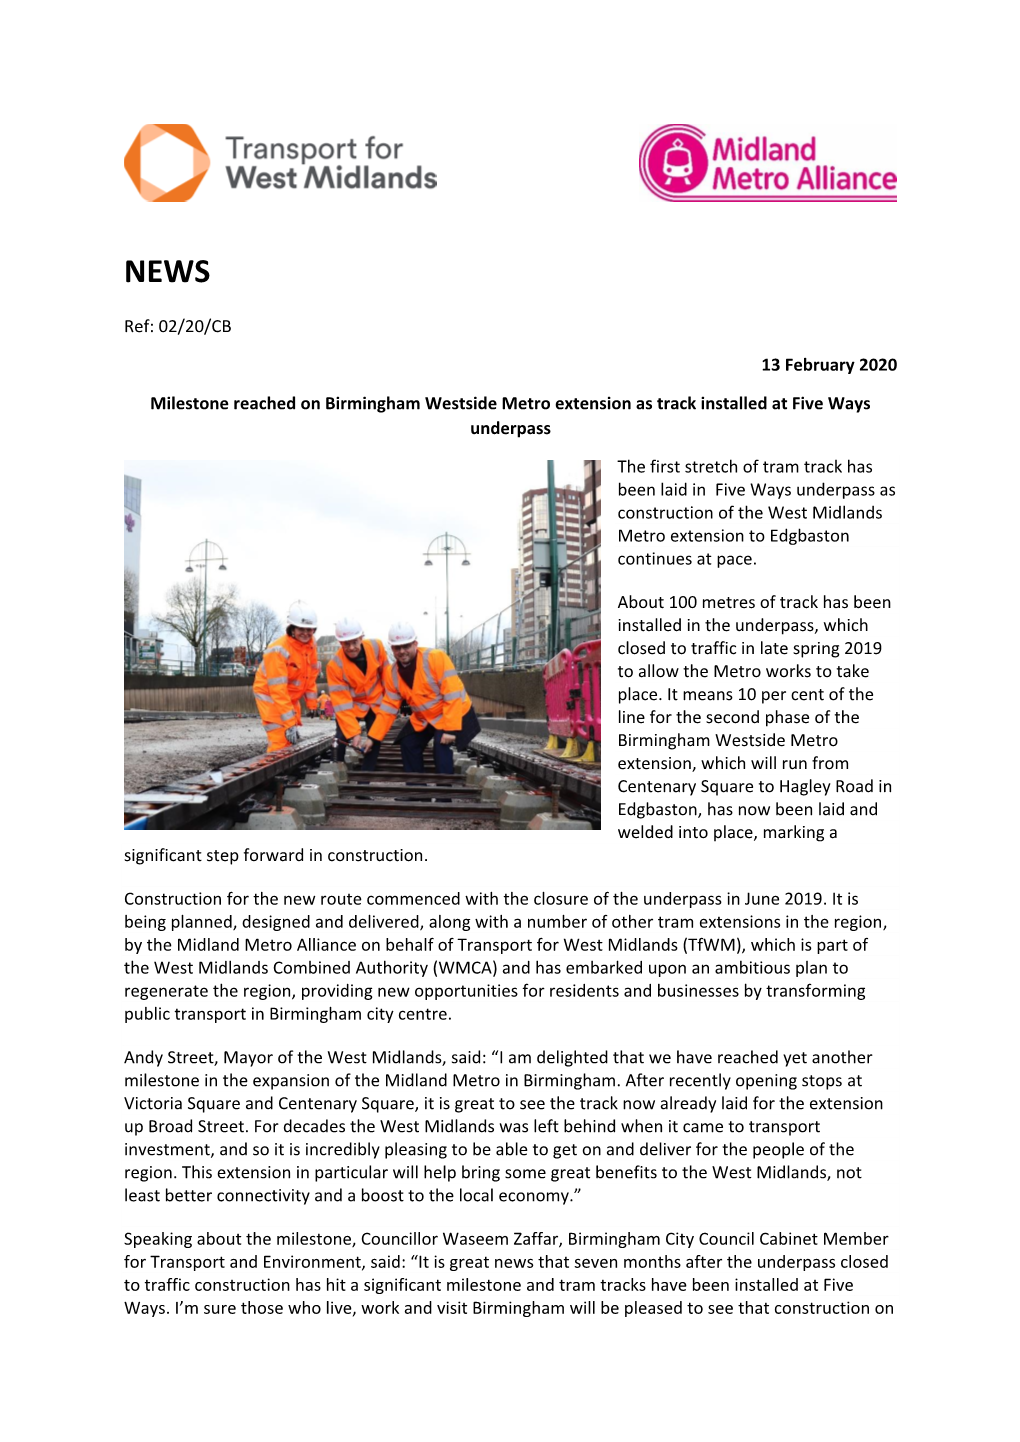 Milestone Reached on Birmingham Westside Metro Extension As Track Installed at Five Ways Underpass